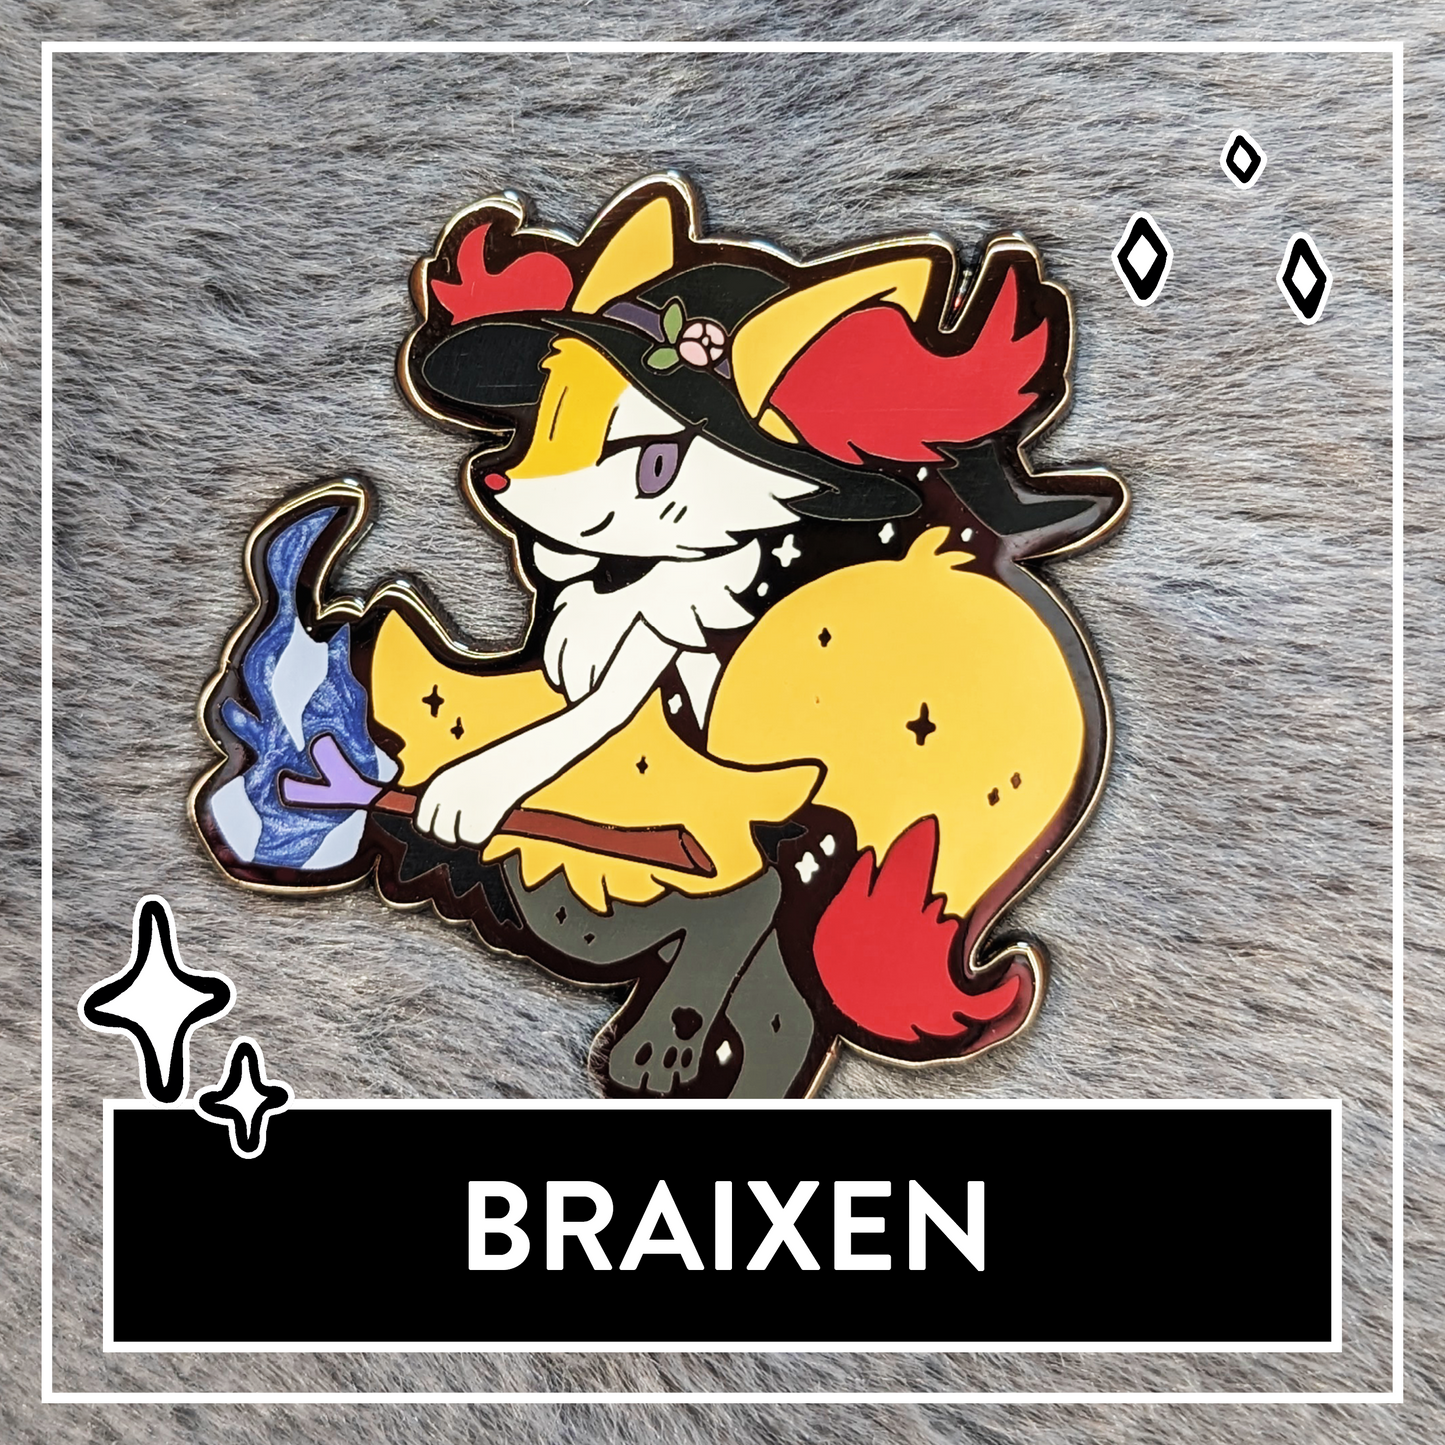 Braixen with pearlescent details